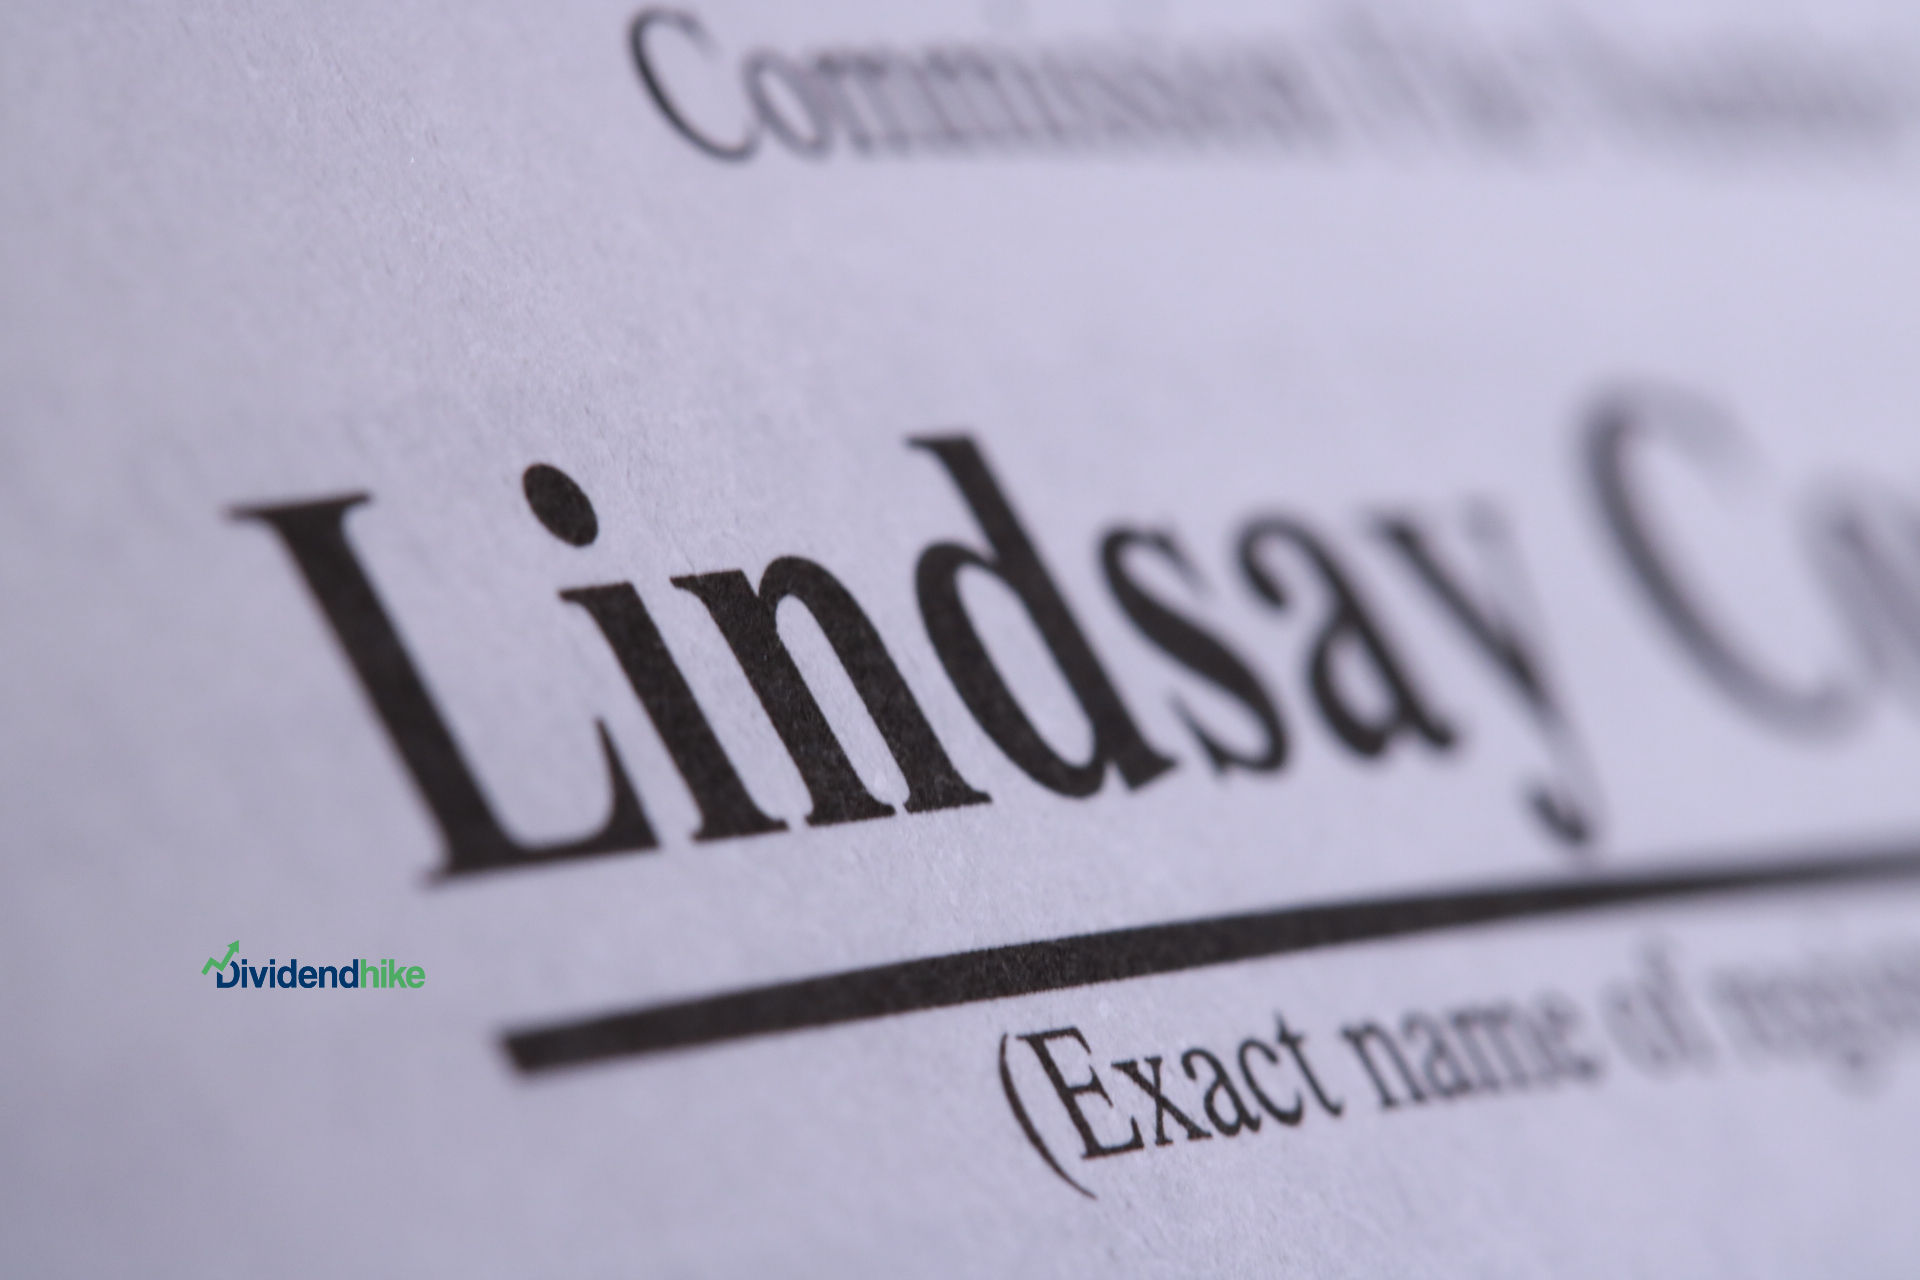 Lindsay hikes dividend by 3.6%